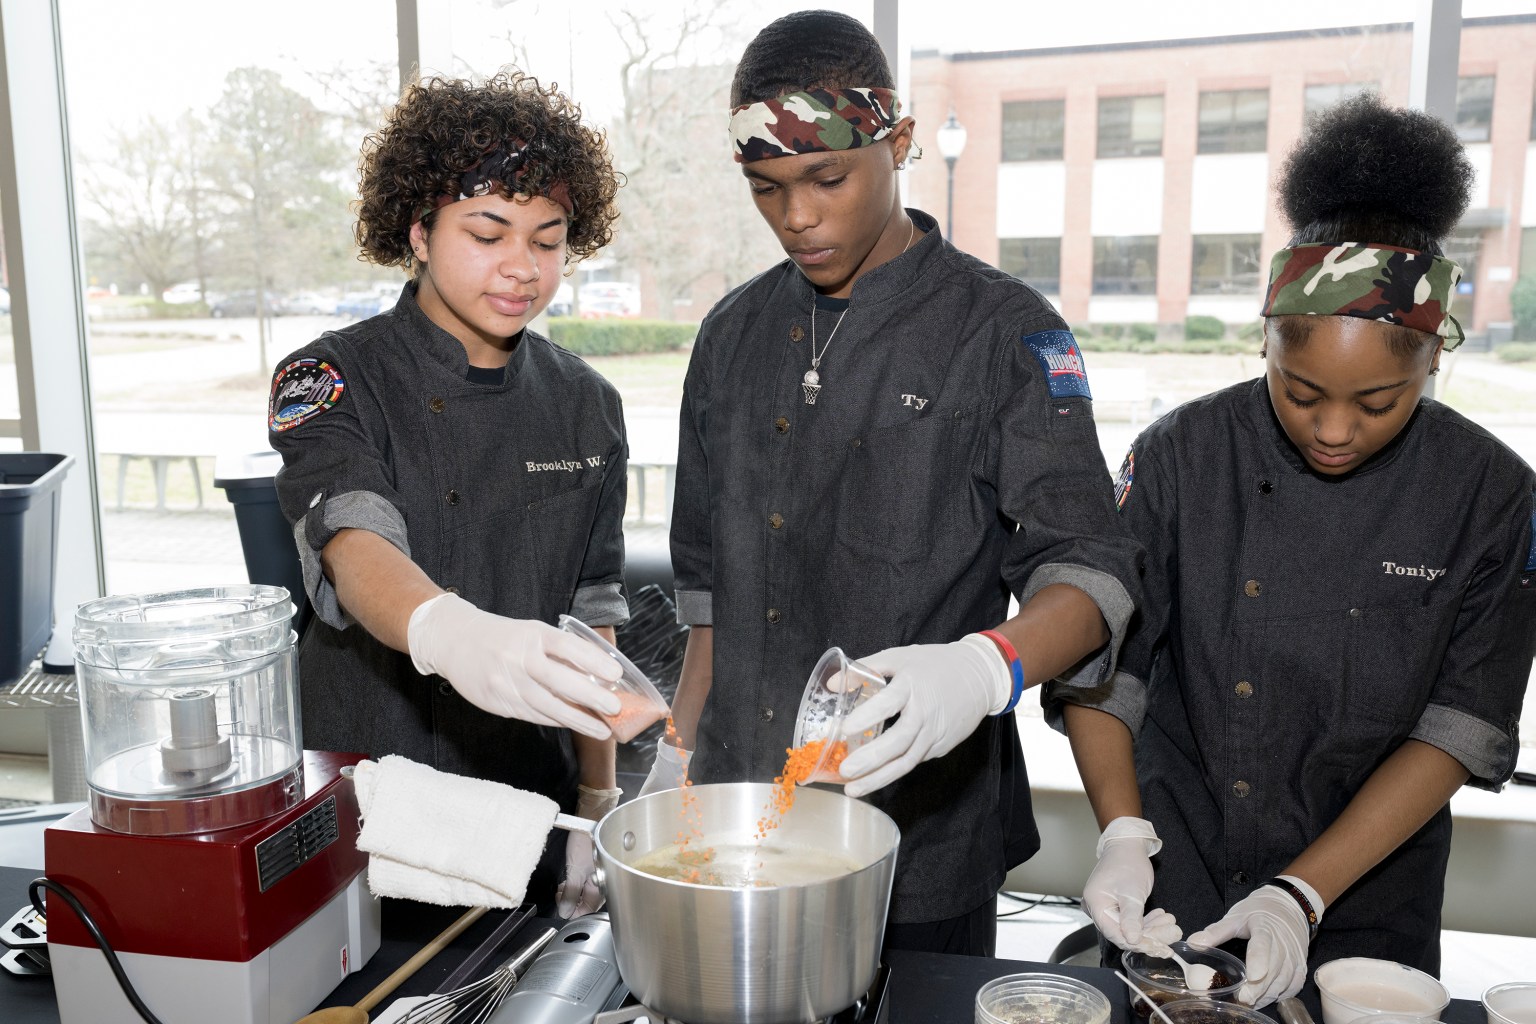 The Phoebus High School culinary team working together to prepare their dish for the judges at the HUNCH Culinary Challenge at NASA's Langley Research Center.